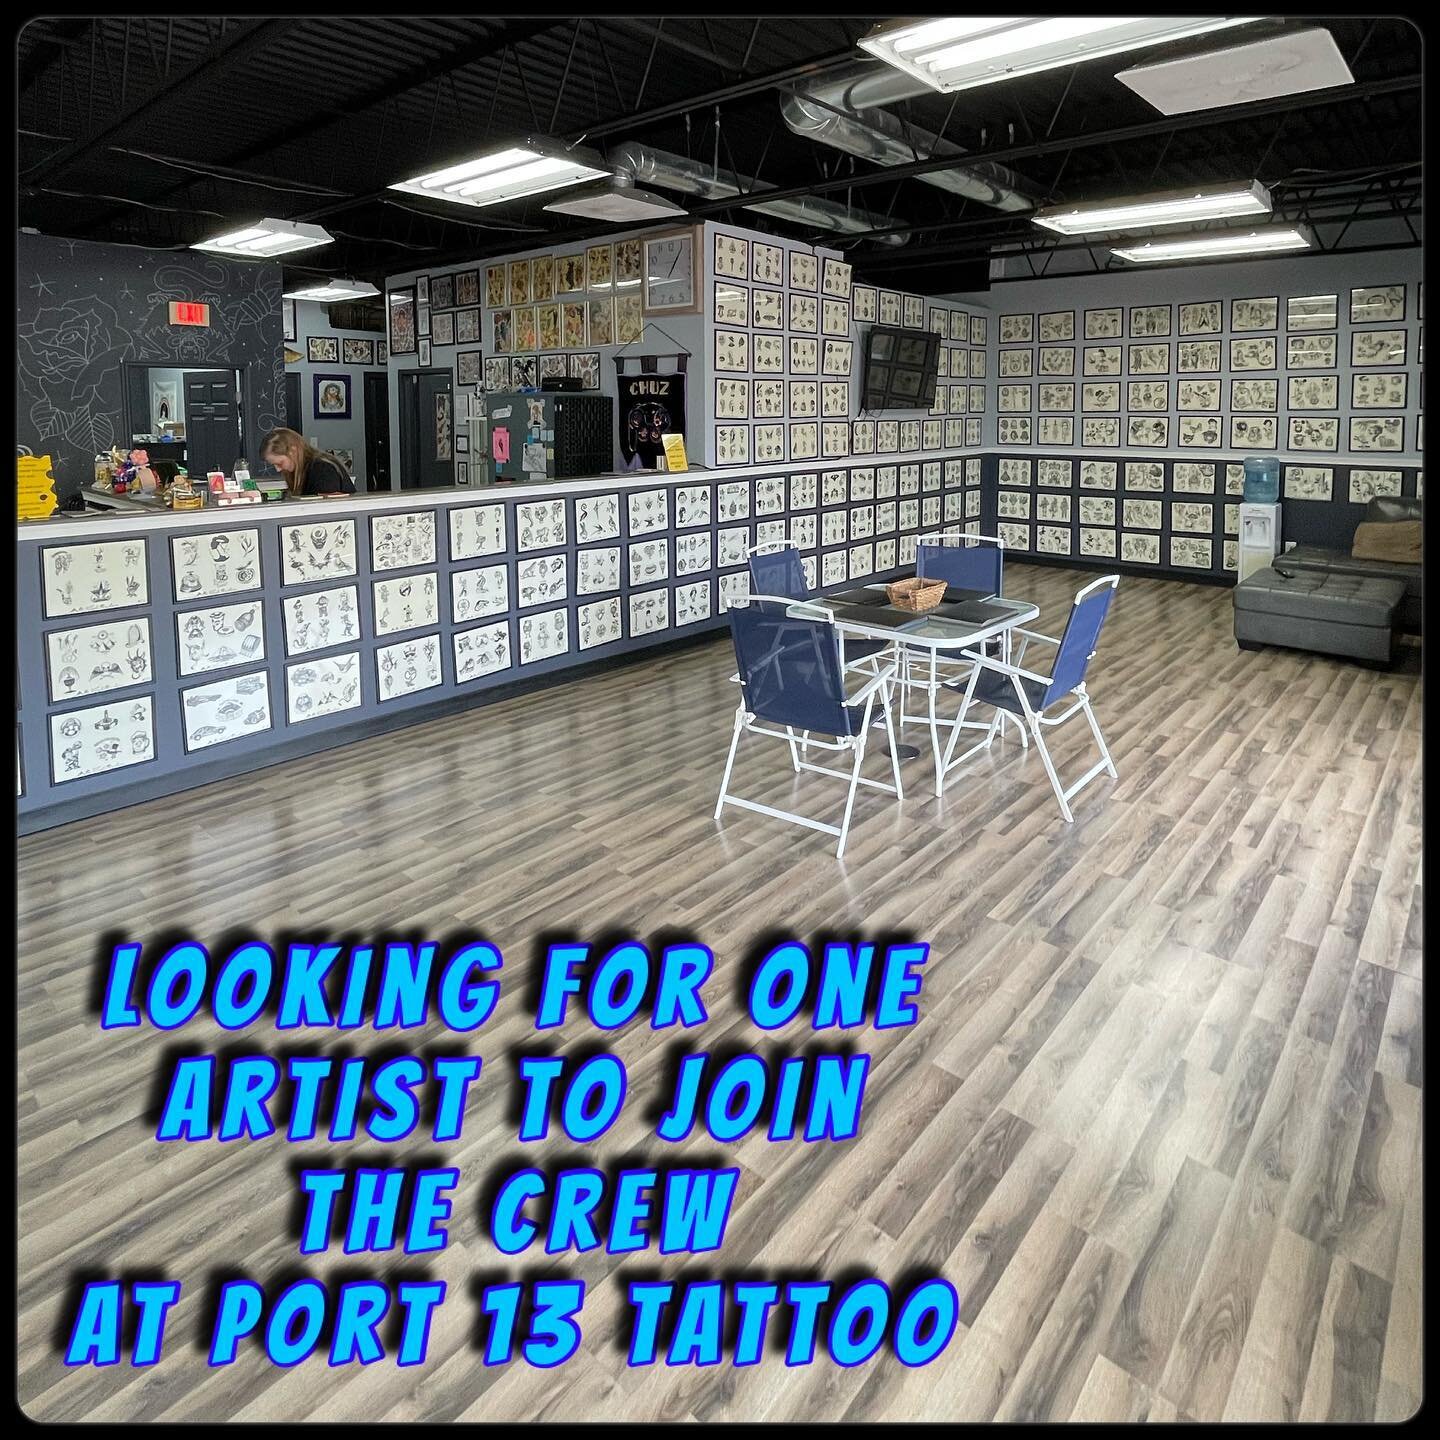 You heard right! We are looking for one more artist to join us. We are a laid back street shop with a strong work ethic. Looking for someone that can be here Tuesday-Saturday 12-8. No half steppers, drug addicts, or drama heads need apply. Contact @p